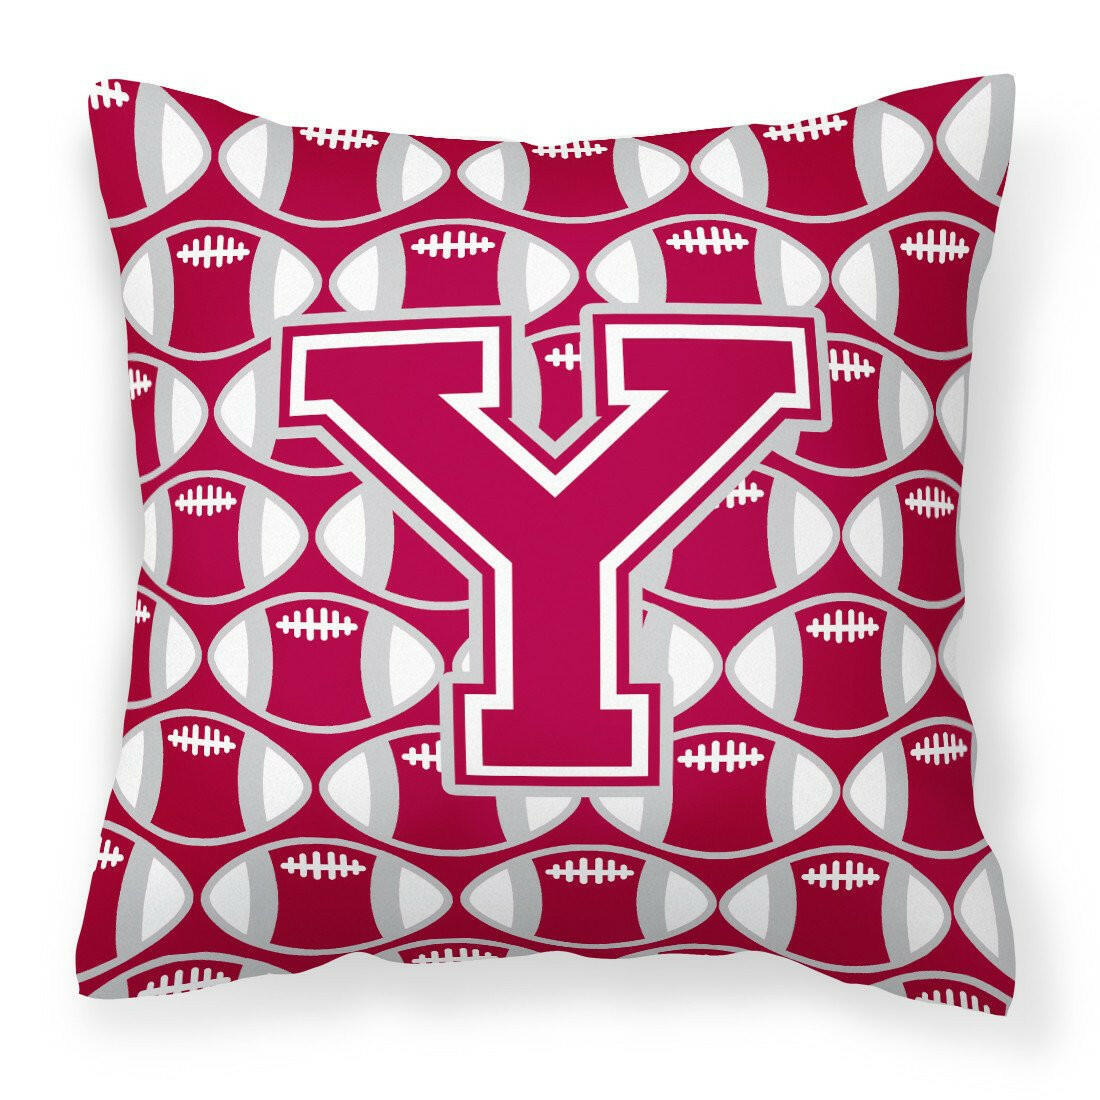 Letter Y Football Crimson, grey and white Fabric Decorative Pillow CJ1065-YPW1414 by Caroline's Treasures